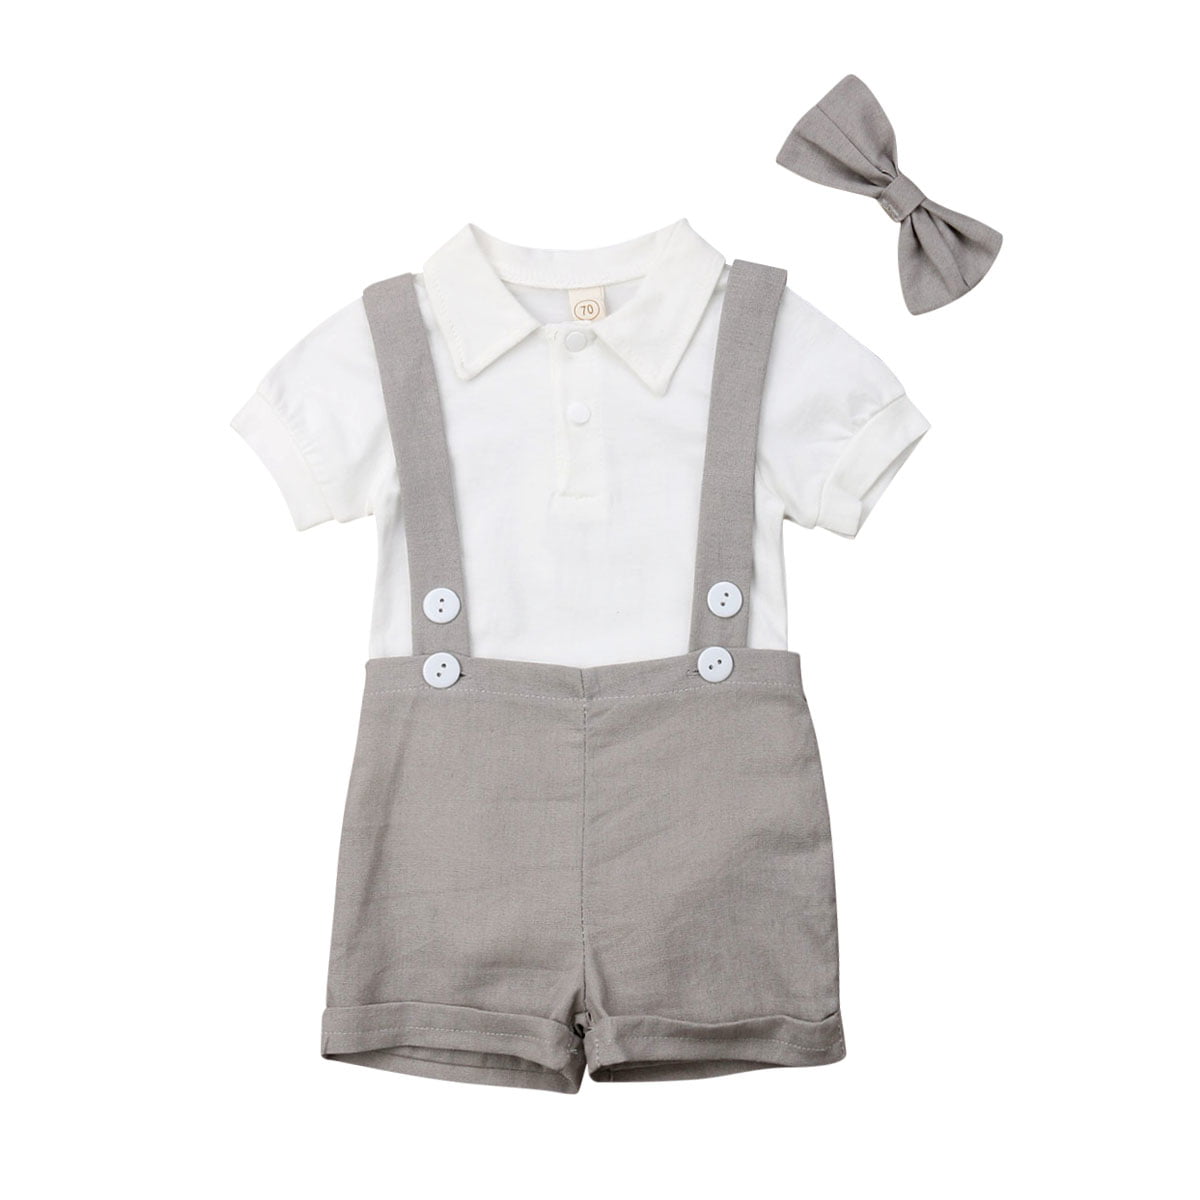 Details about   Toddler Newborn Baby Boys Clothes Gentleman Polo T-Shirt Tops+Shorts Outfits Set 